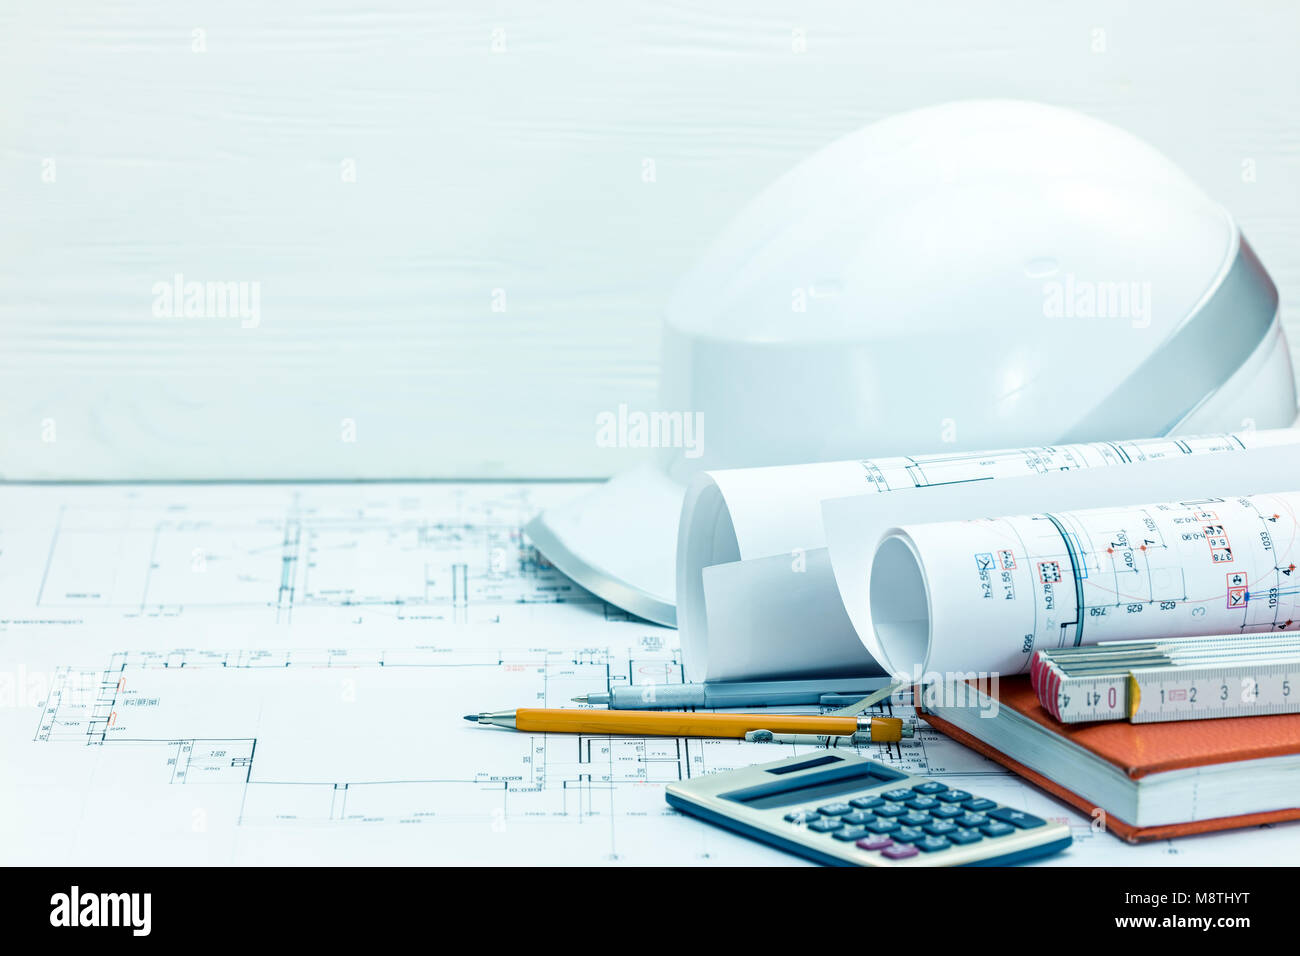 contractors workplace background. drawing and measuring tools, protective helmet, notebook, blueprints. construction concept. Stock Photo